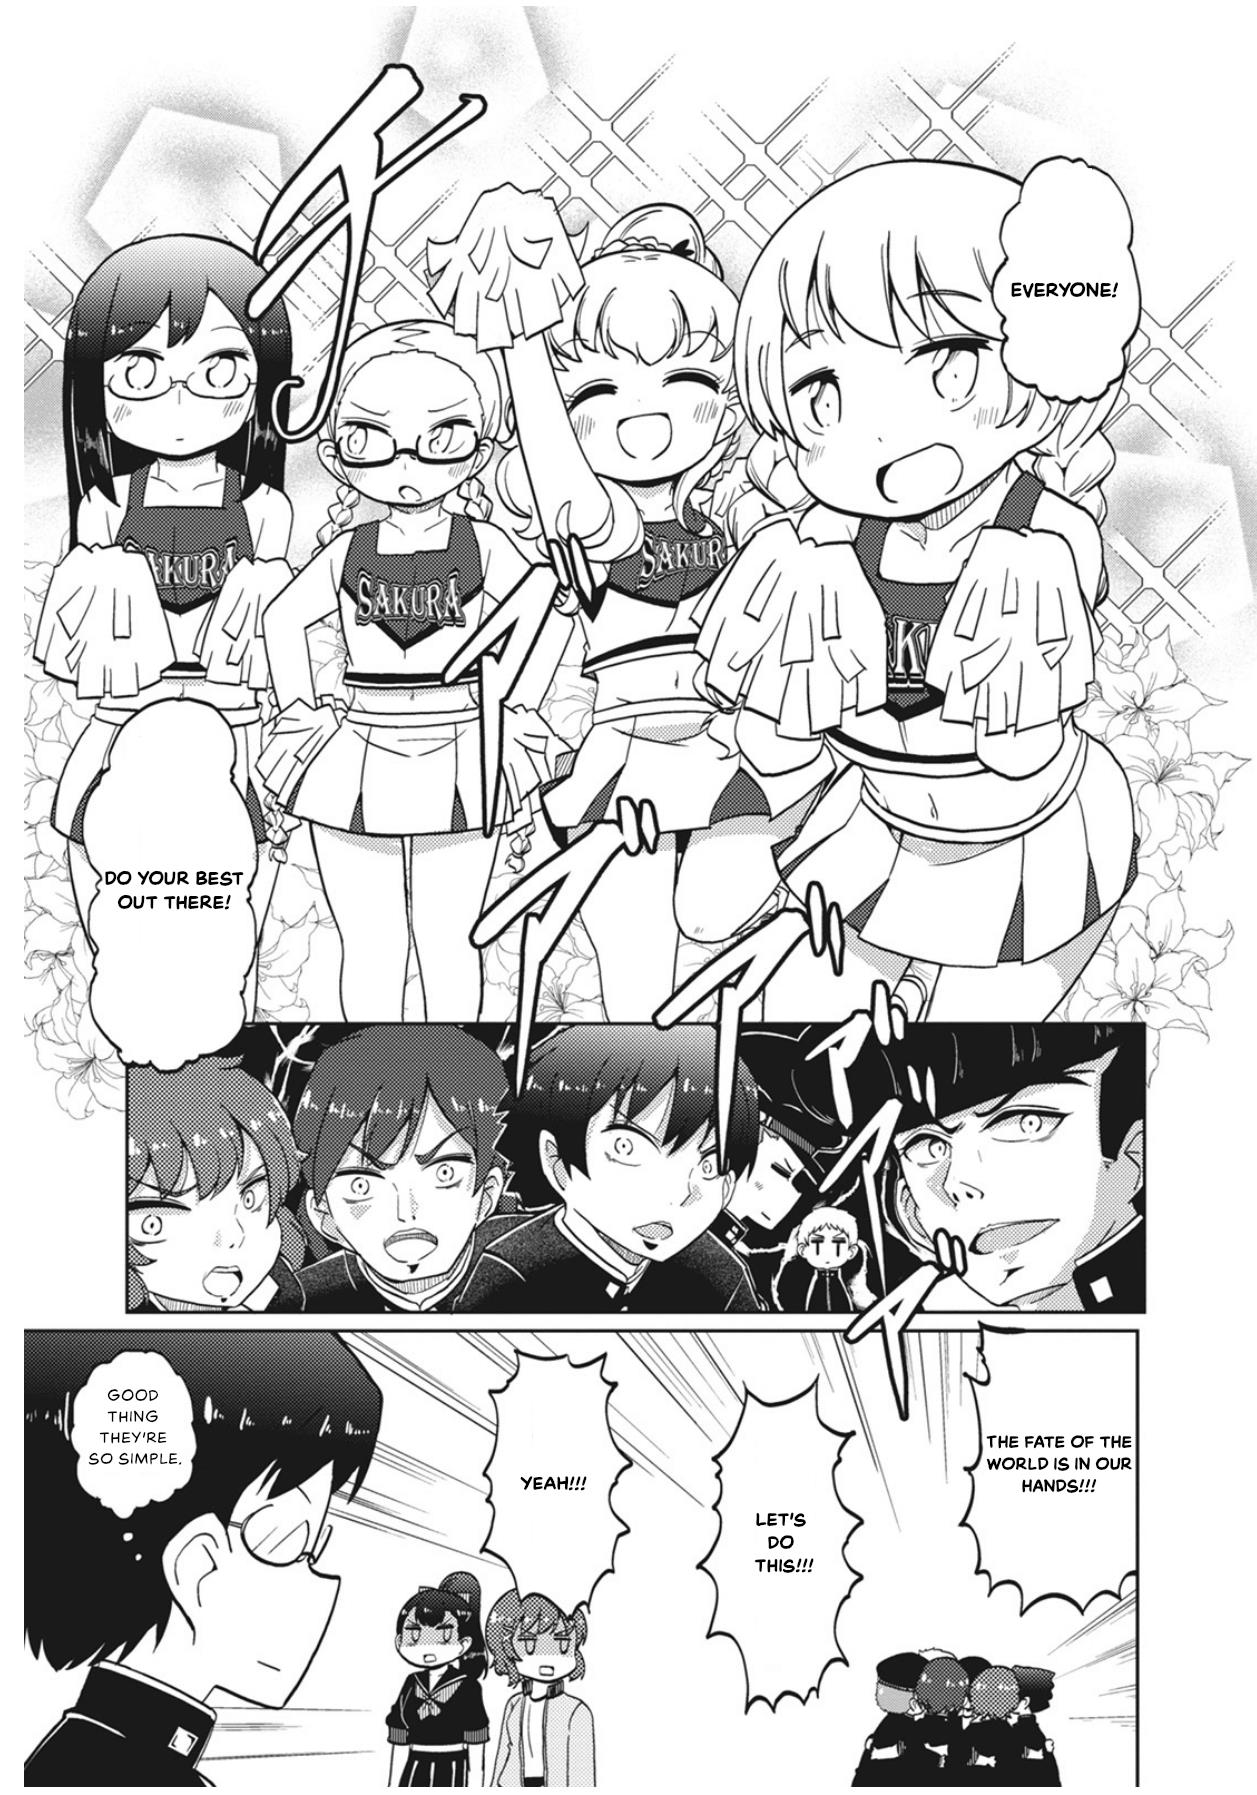 4-Panel 13 Sentinels: Aegis Rim This Is Sector X Chapter 10.5 #5